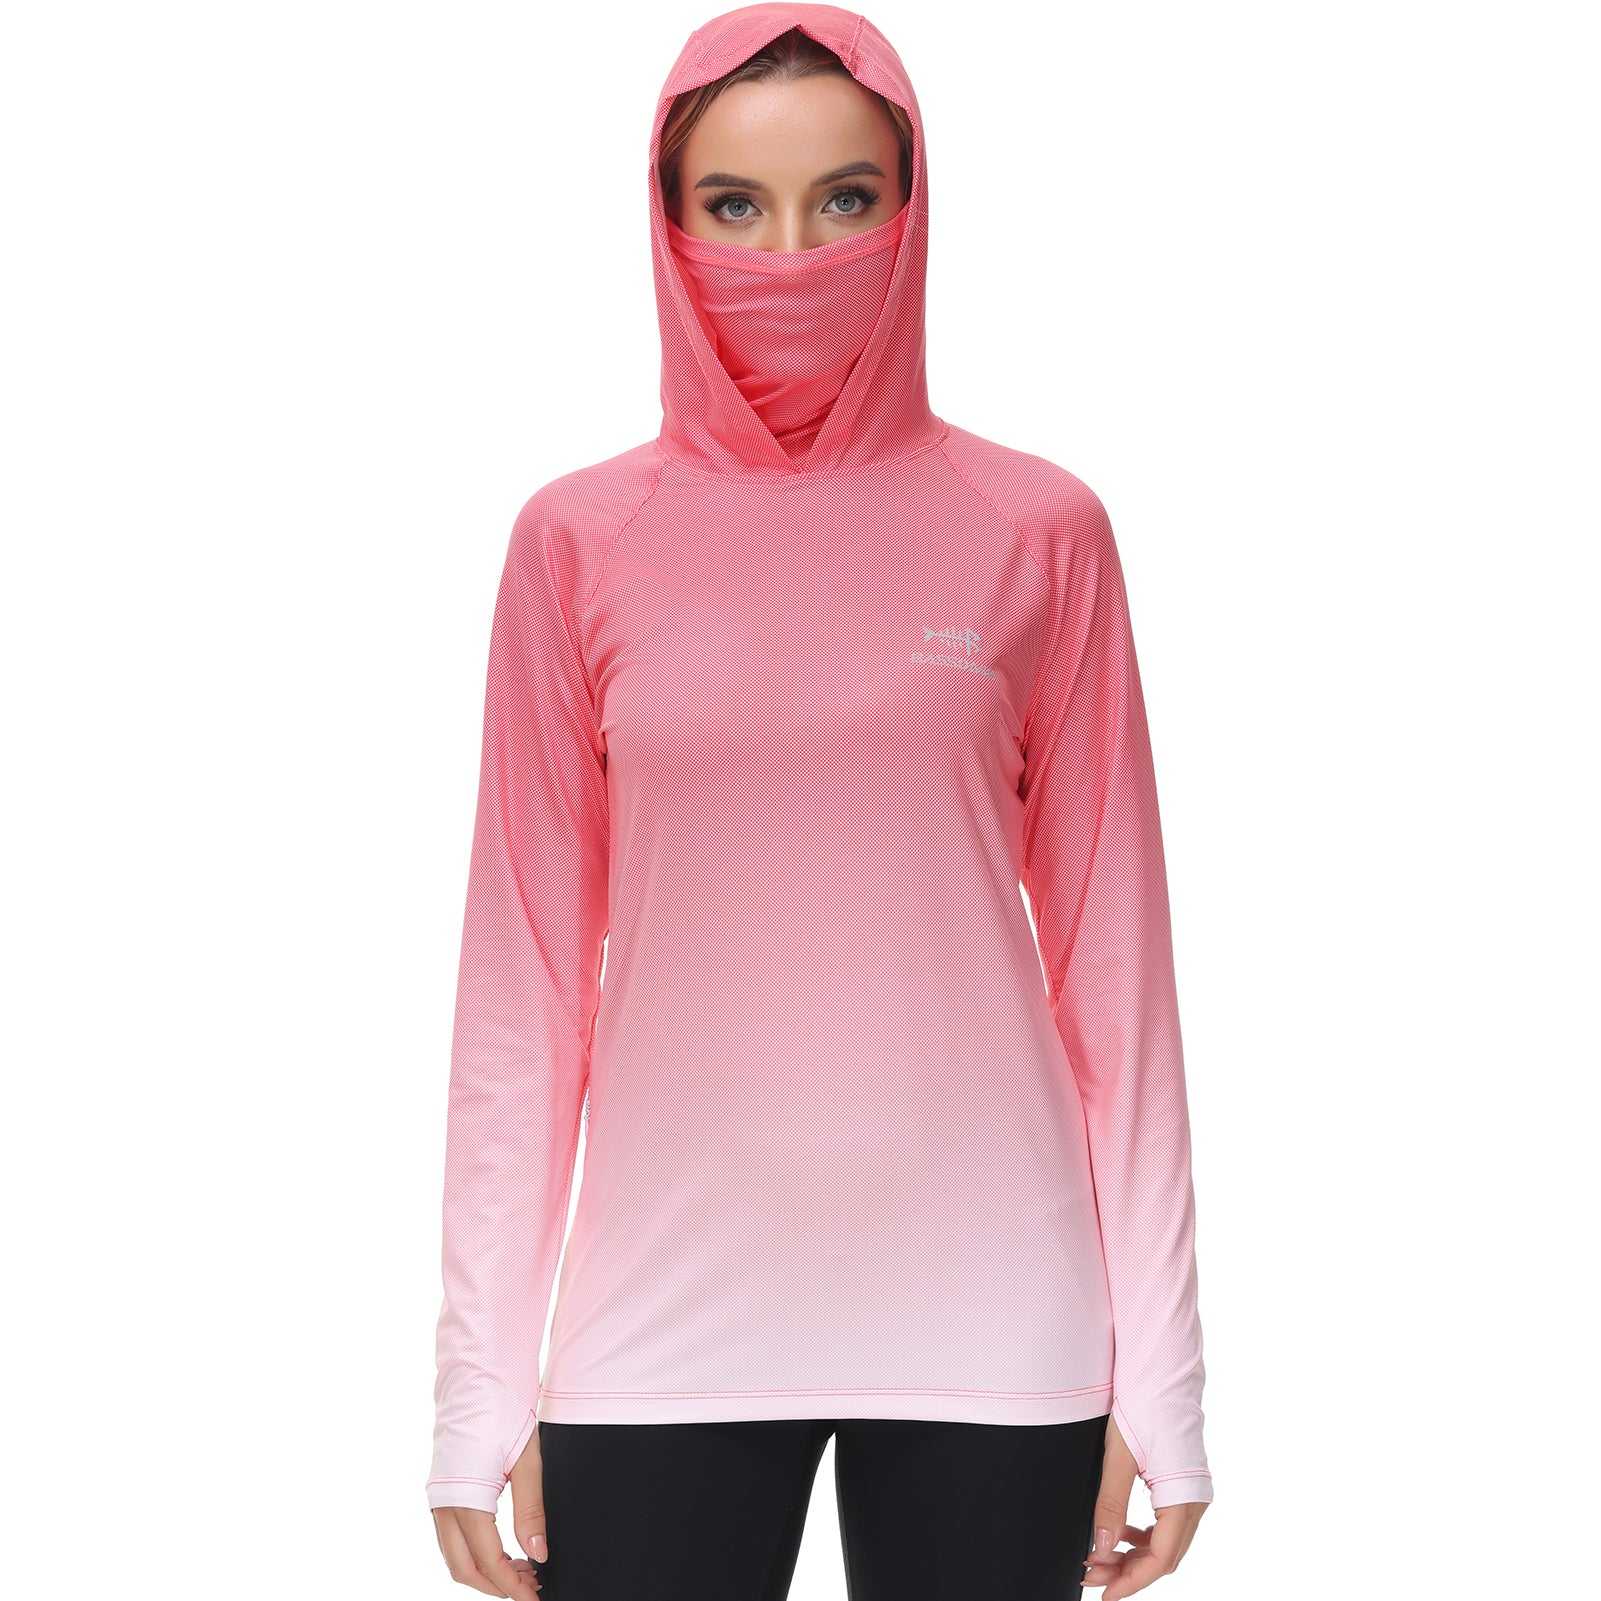 Women's Hooded Fishing Shirt with Face Mask